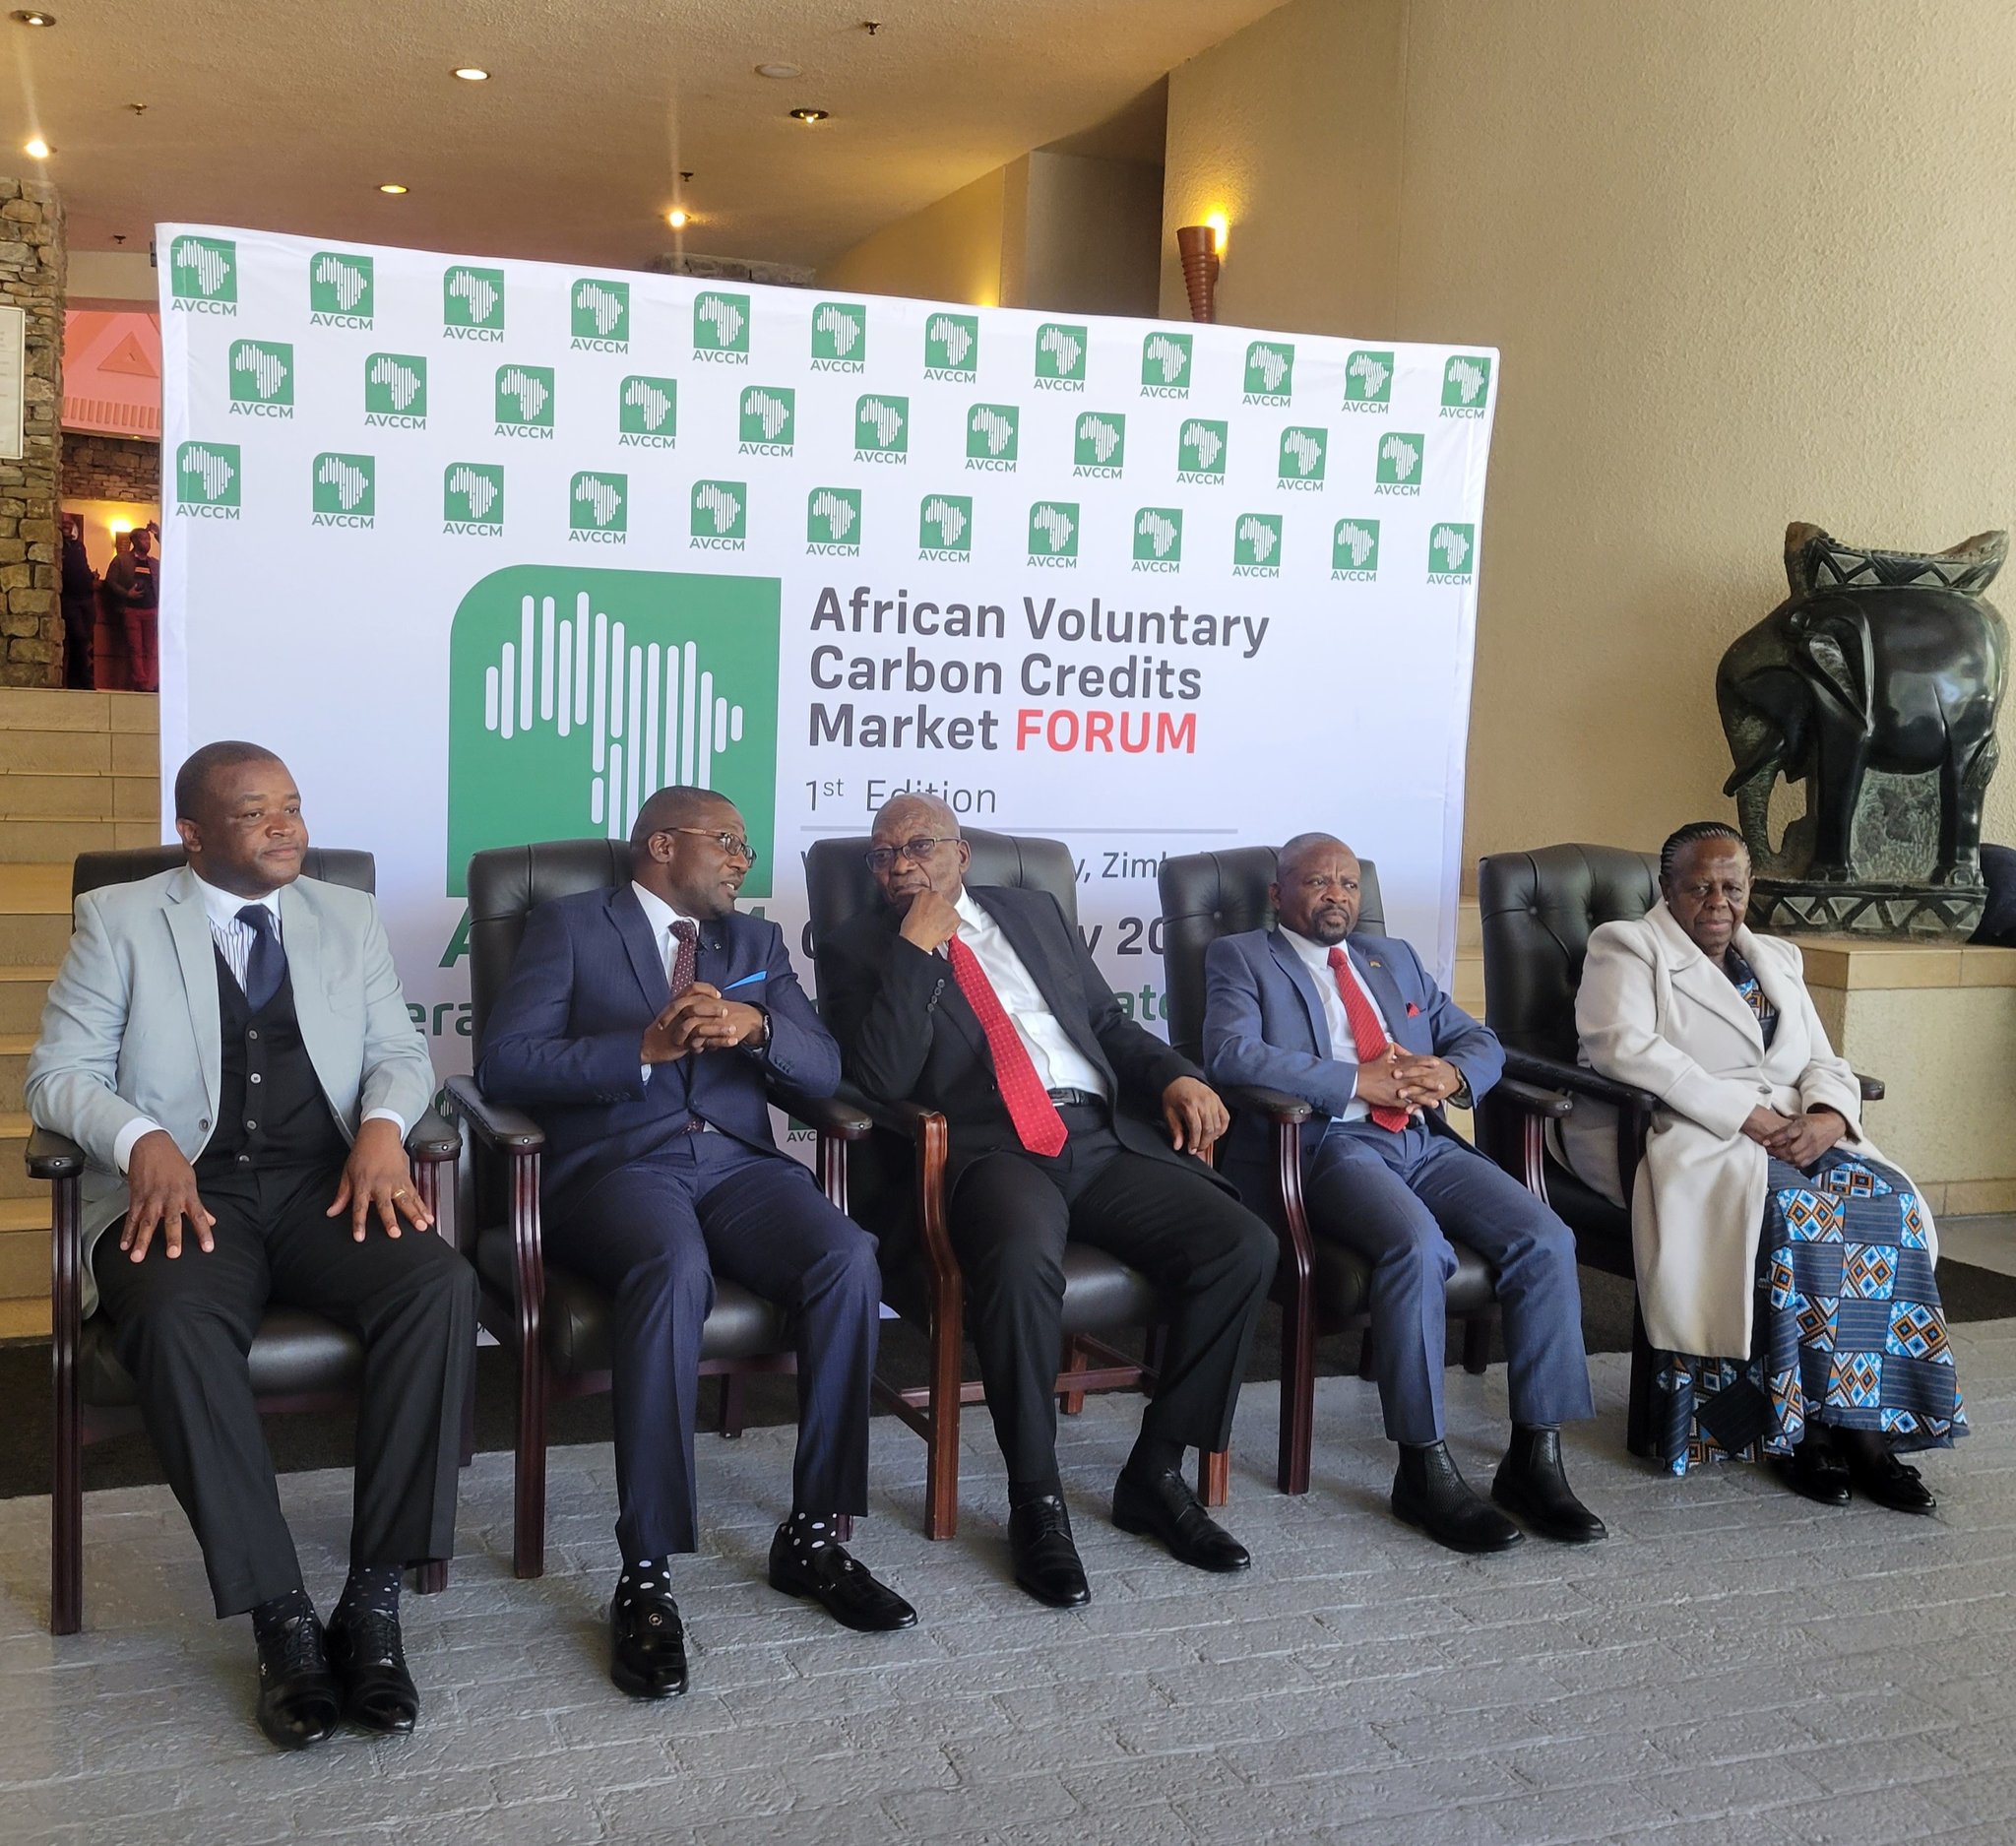 Minister Ndhlovu officially opened the Africa Voluntary Carbon Credit Market Forum